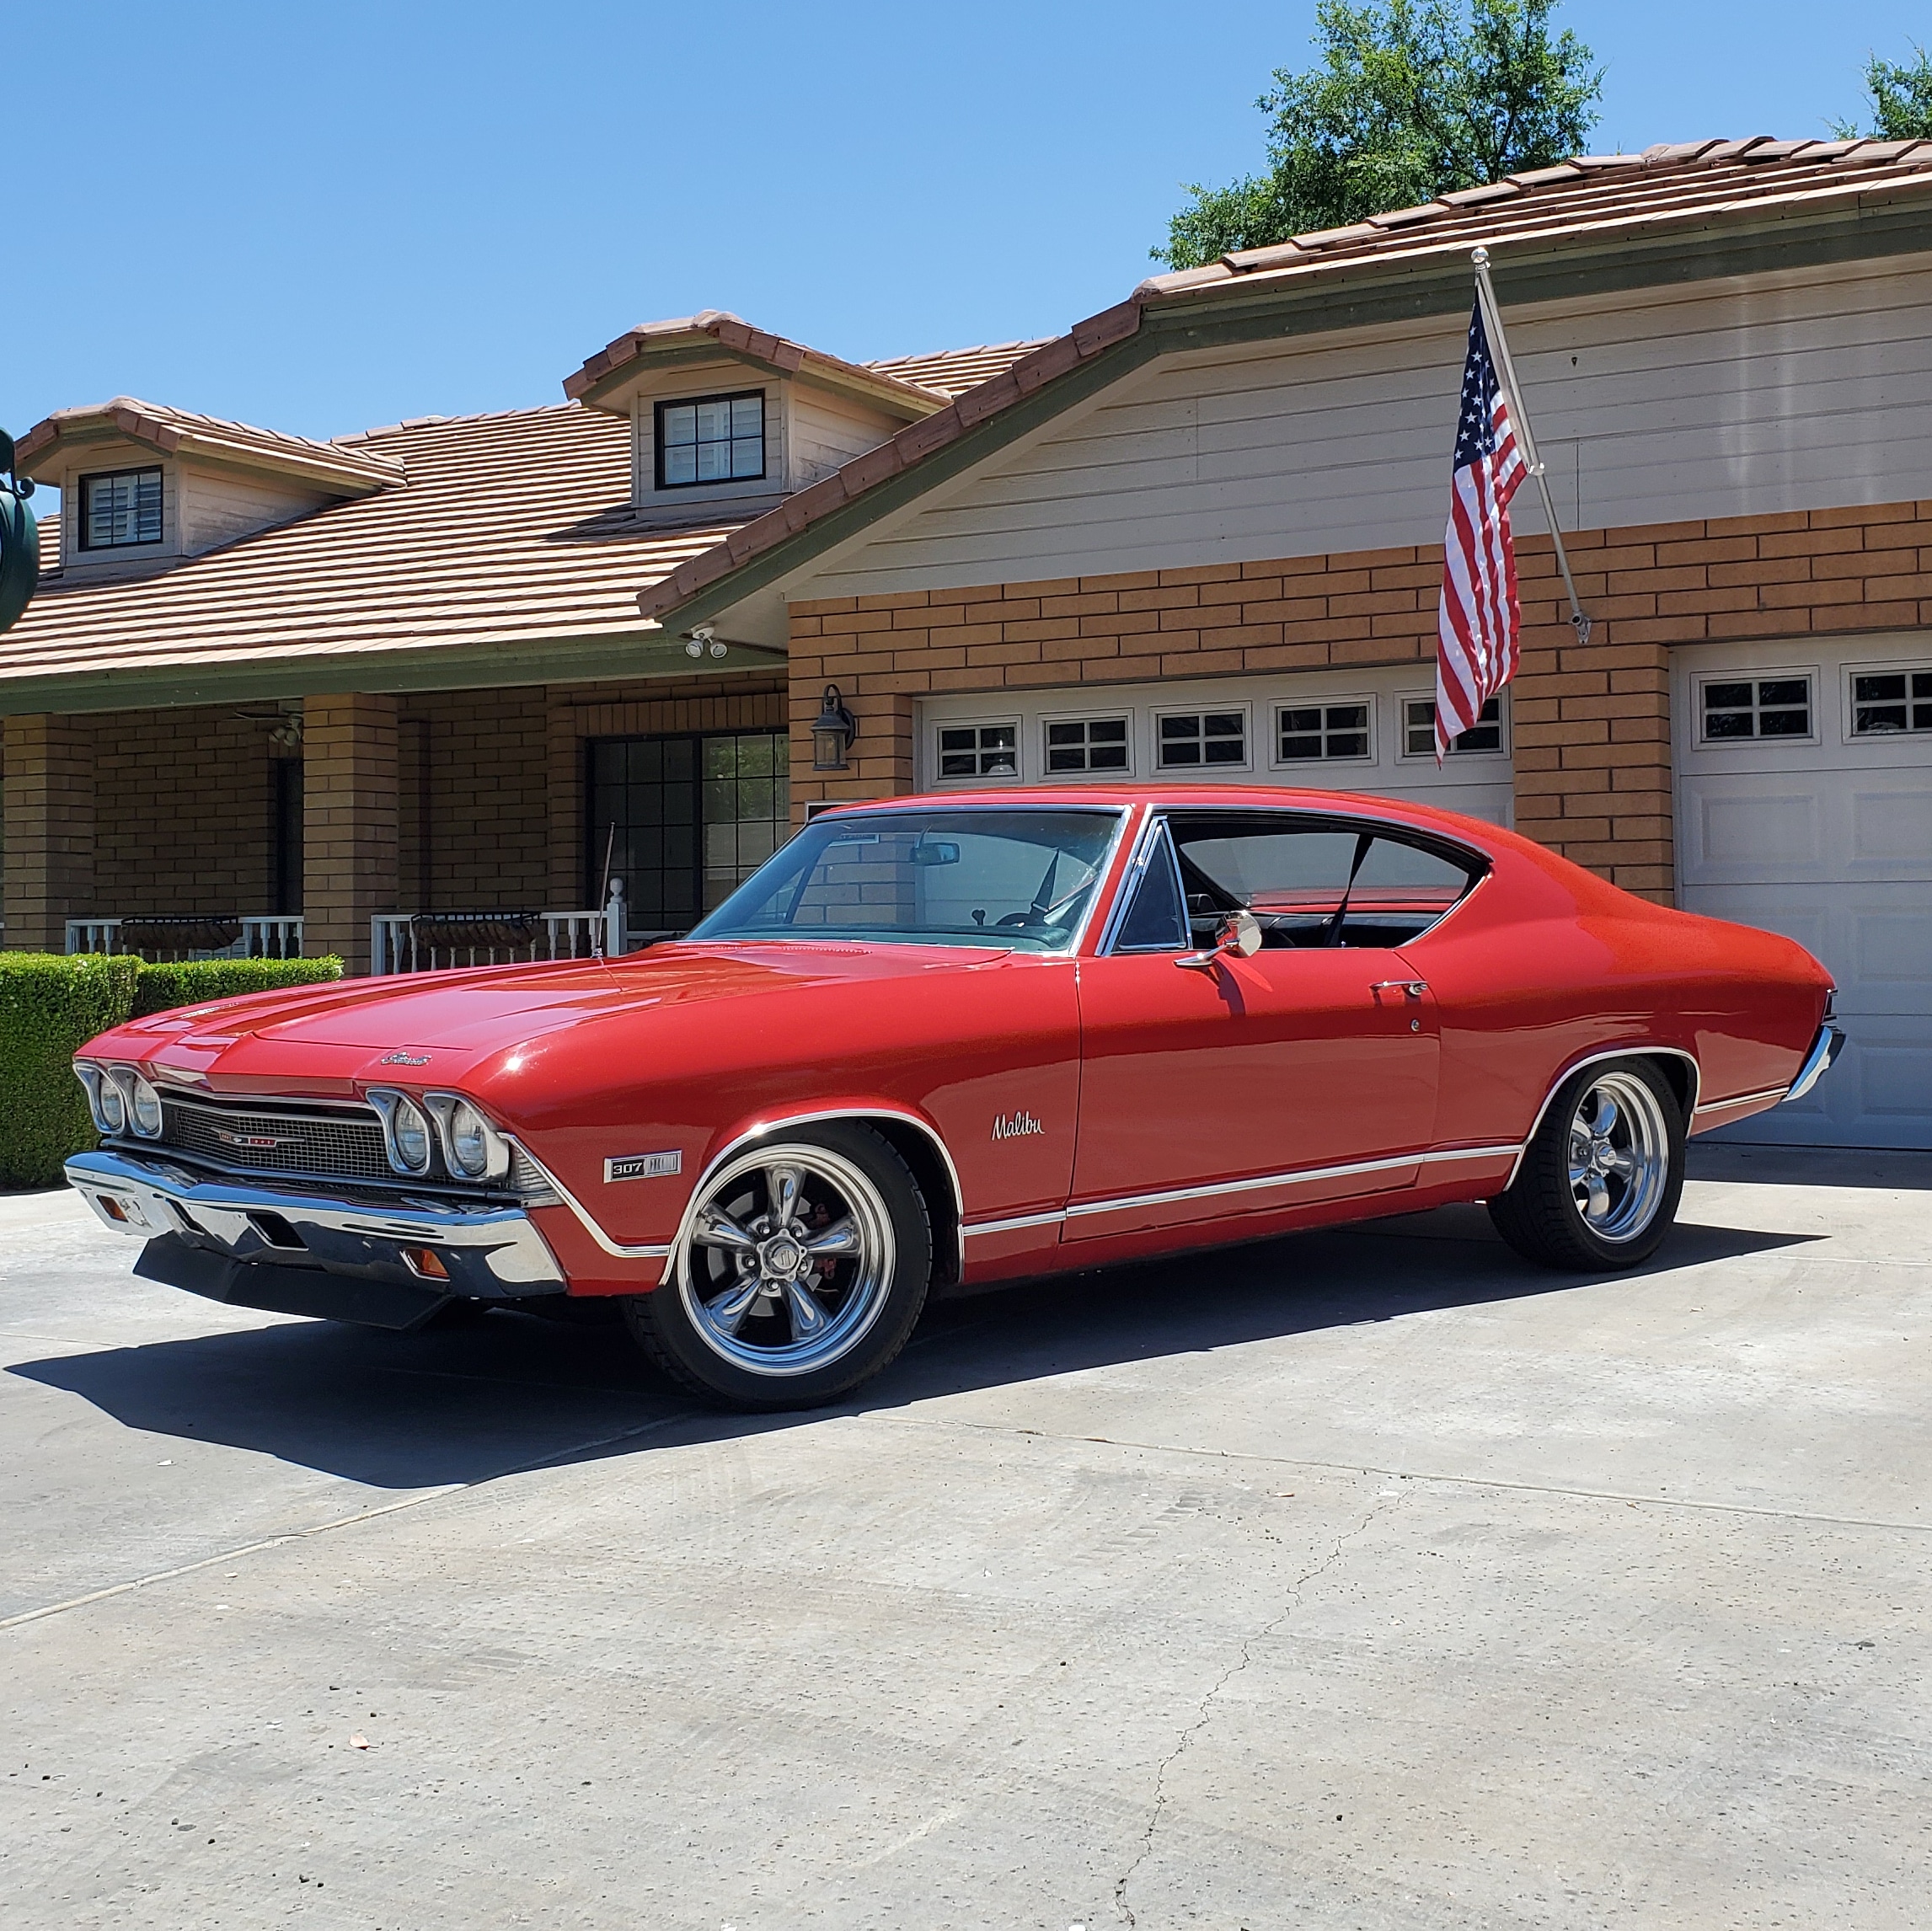 Top 92+ Images pictures of a 68 chevelle Superb